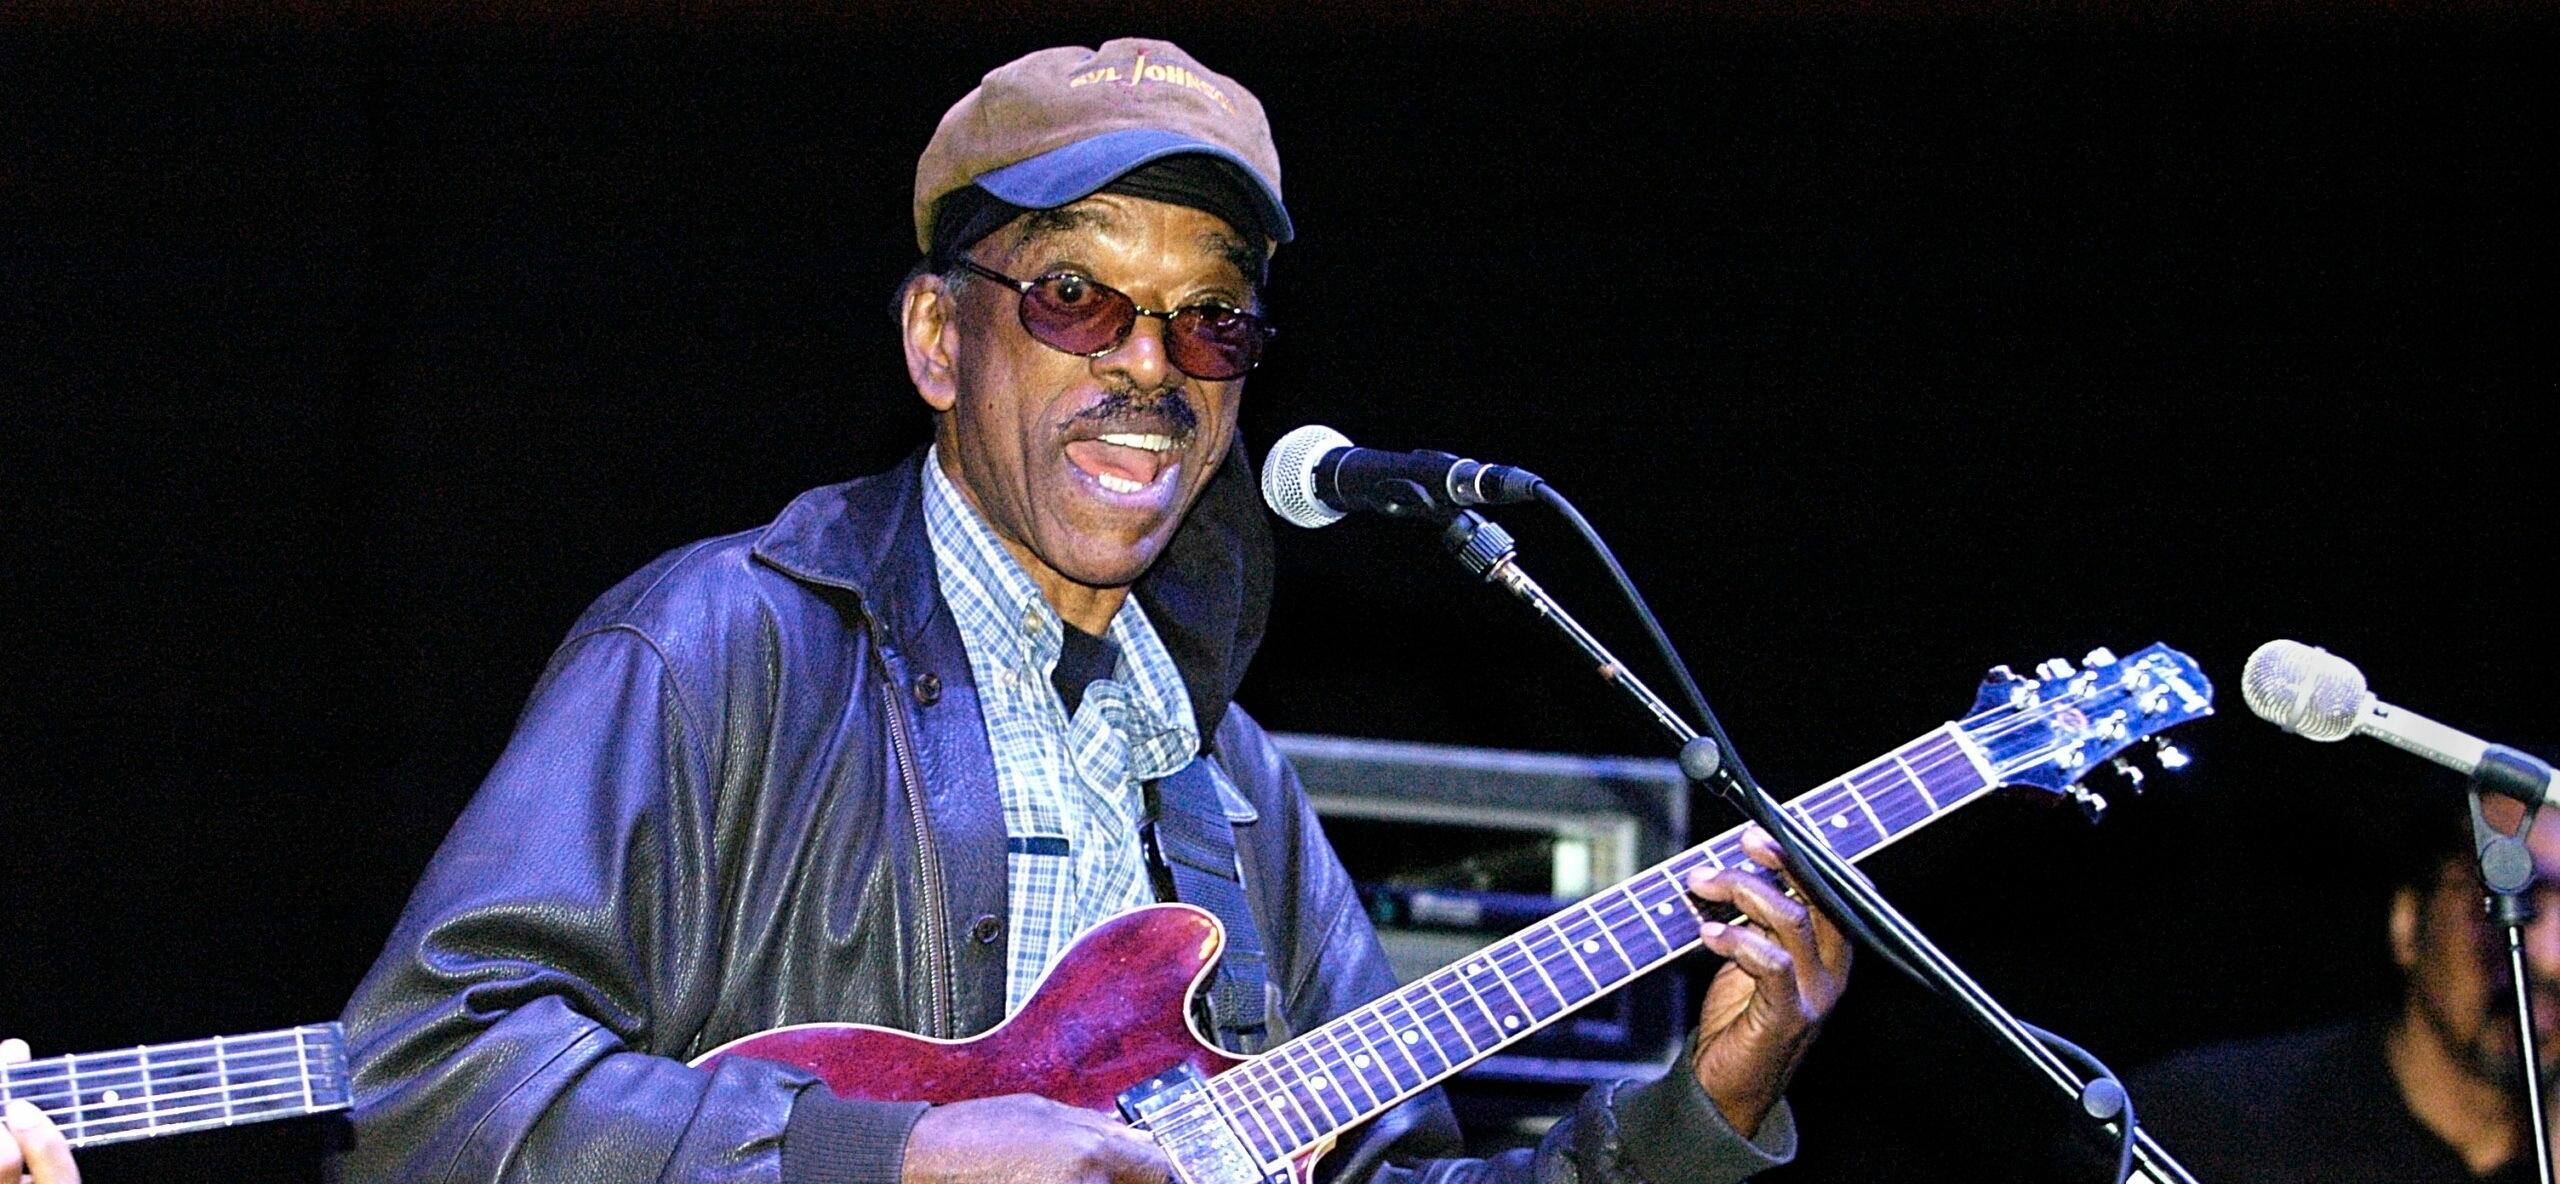 Syl Johnson performing with the Hi Band at the Barbican Centre, London on 22 Apr